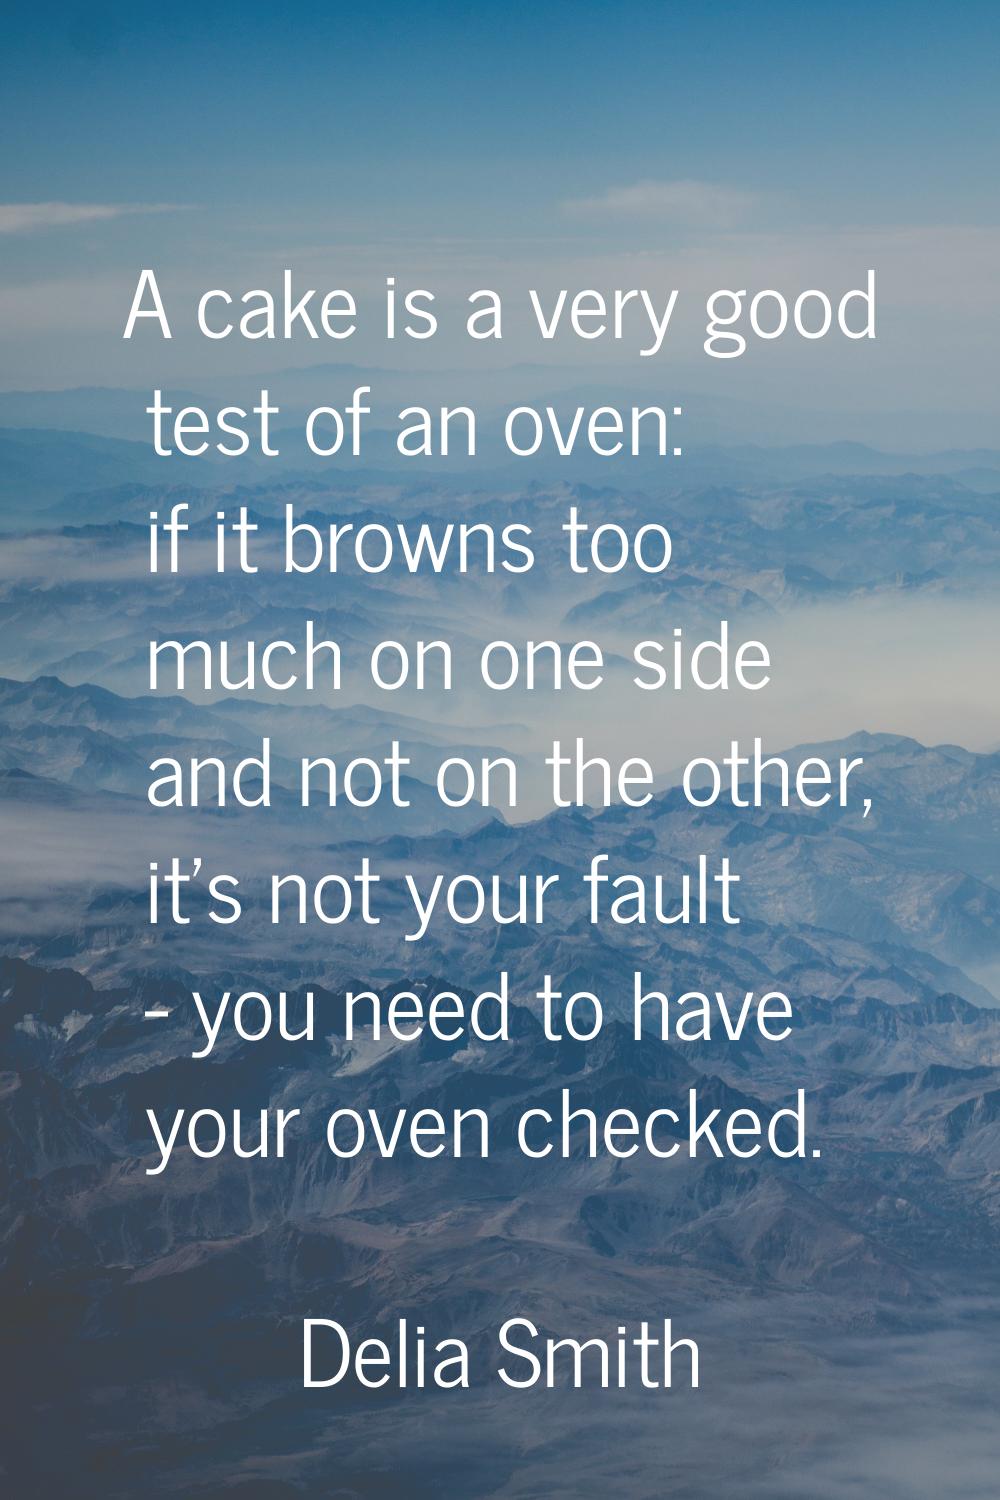 A cake is a very good test of an oven: if it browns too much on one side and not on the other, it's